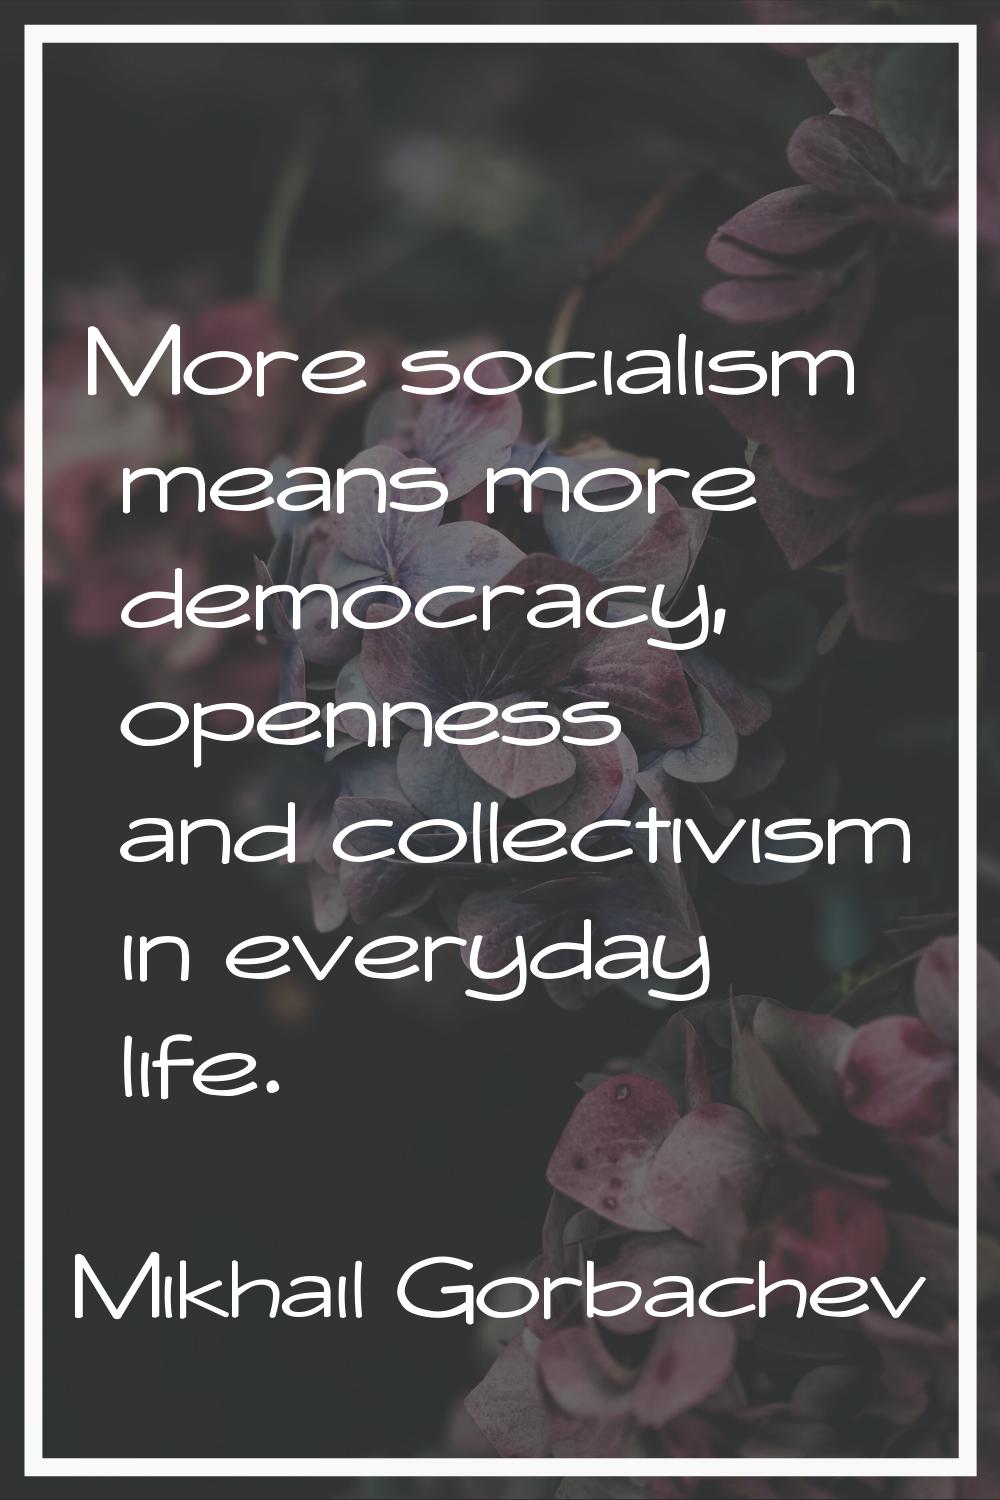 More socialism means more democracy, openness and collectivism in everyday life.